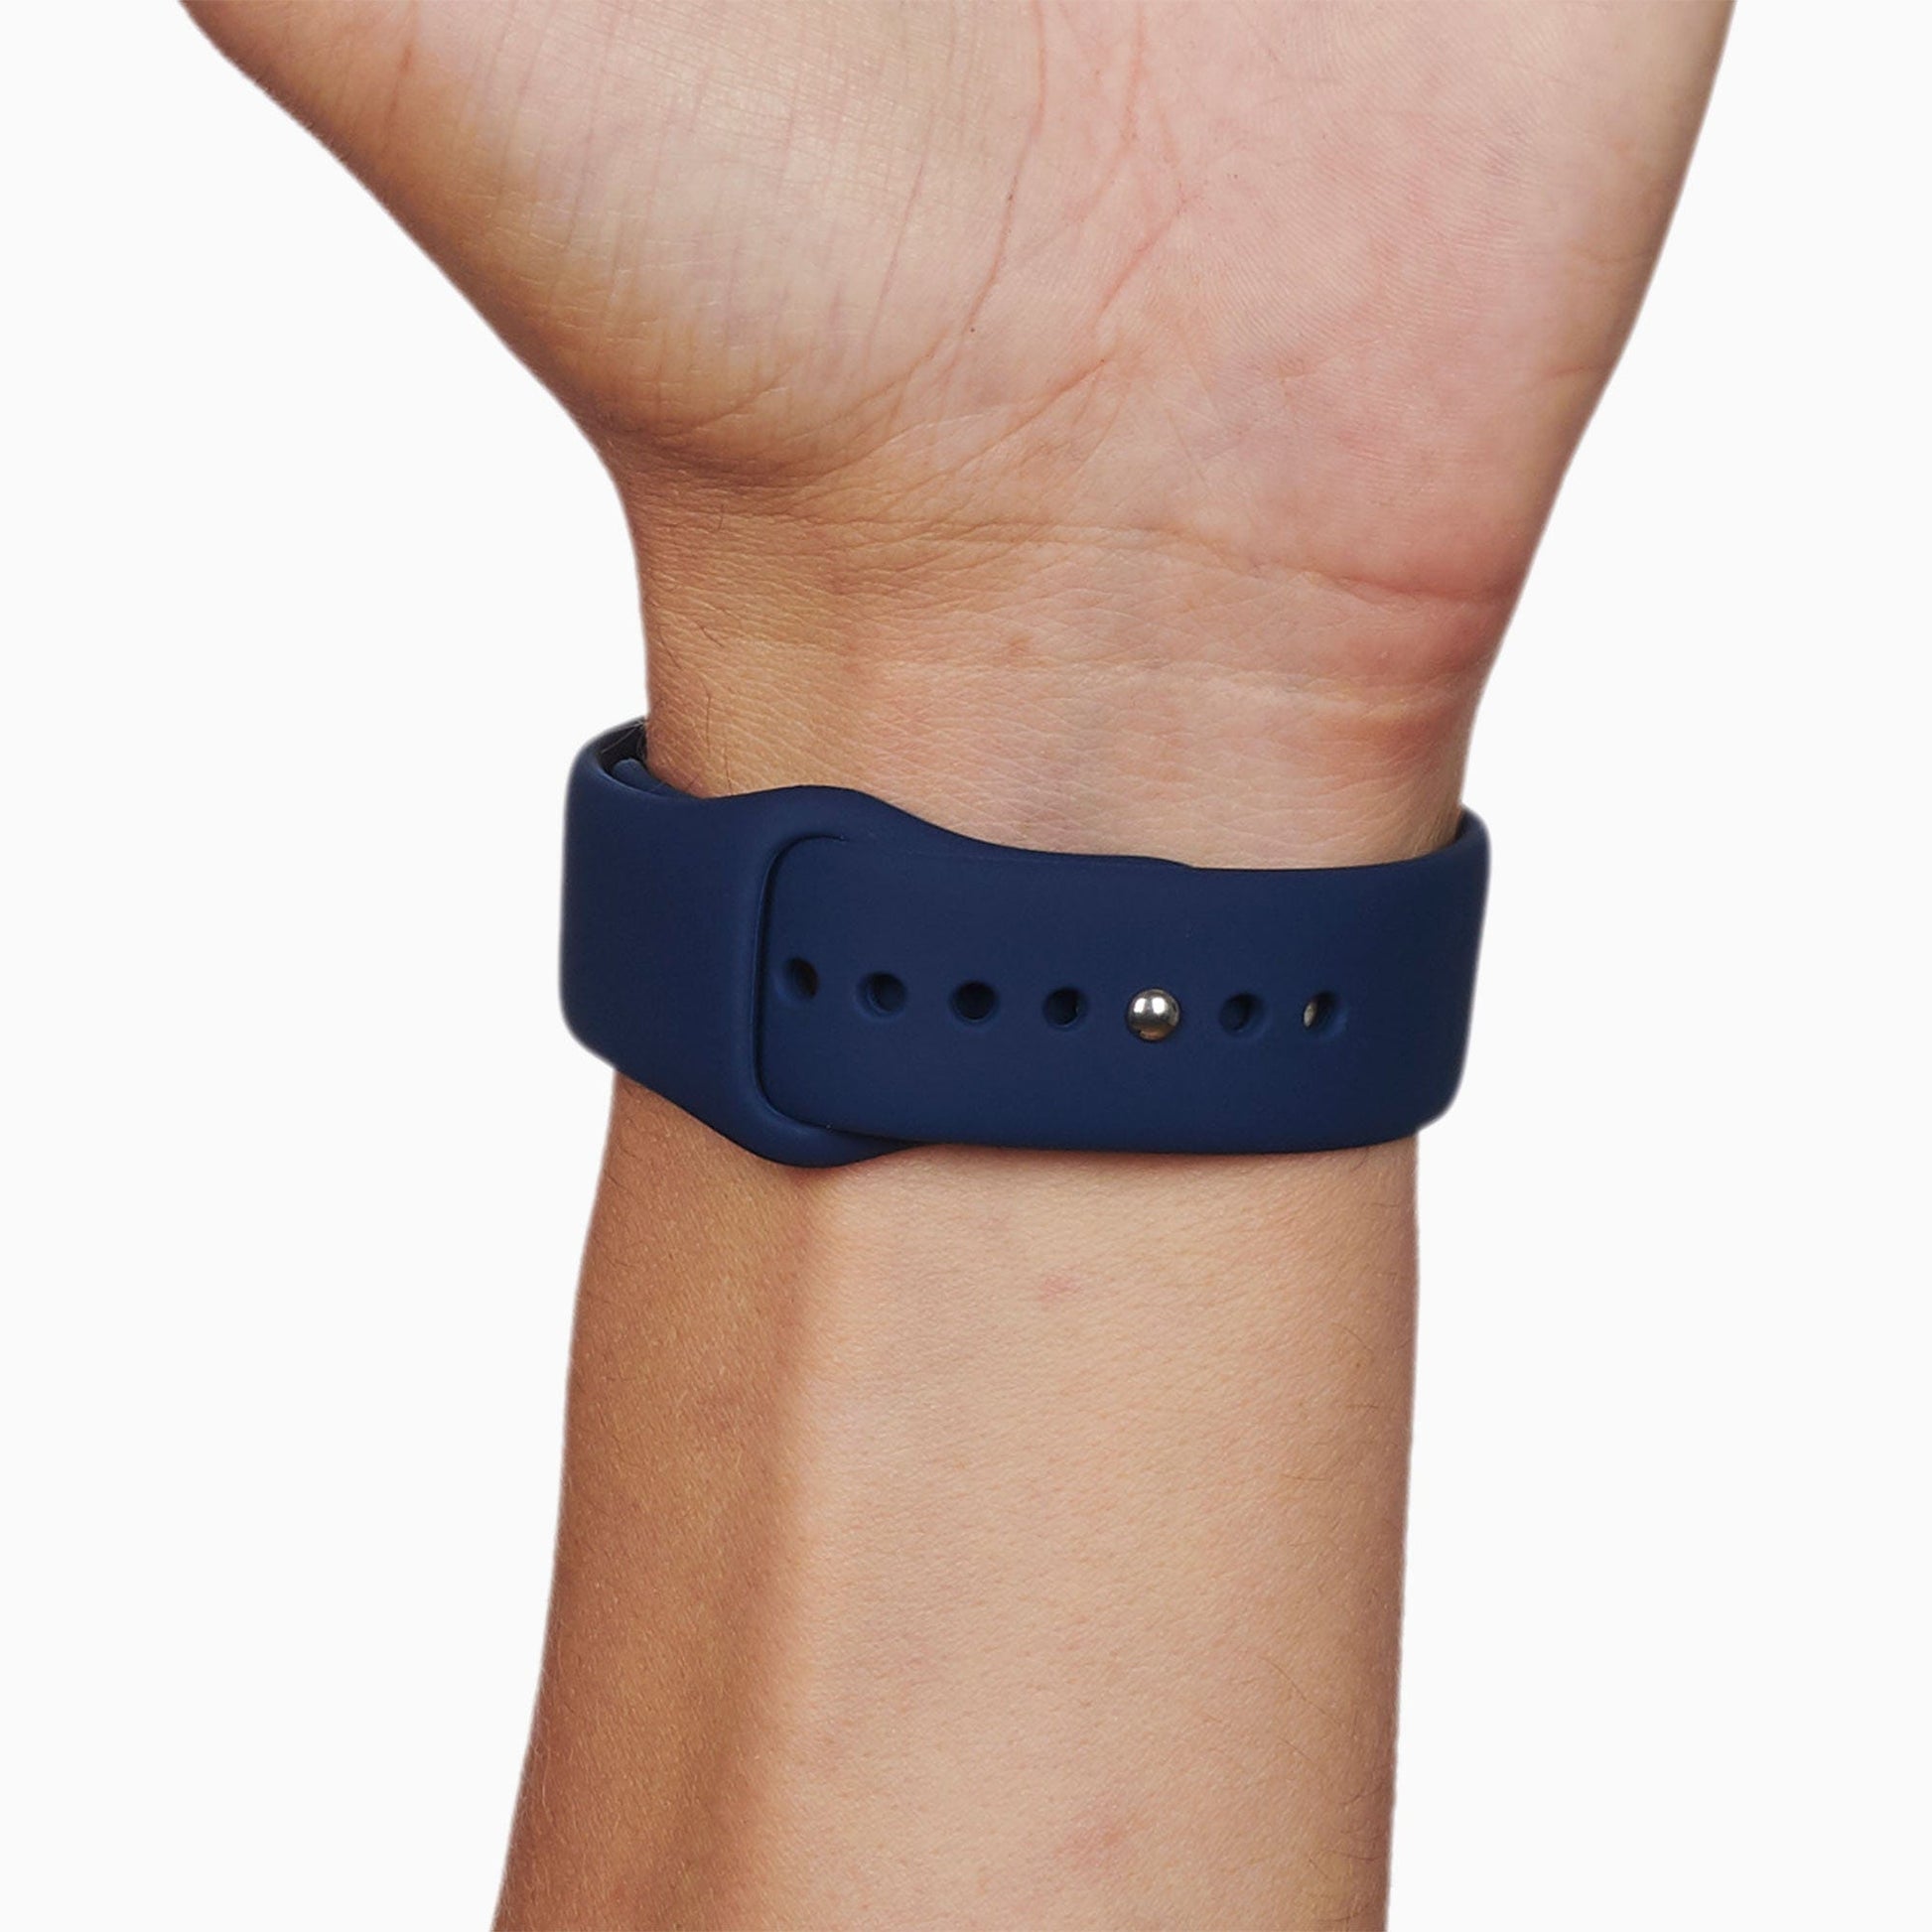 Midnight Blue Sport Band for Apple Watch